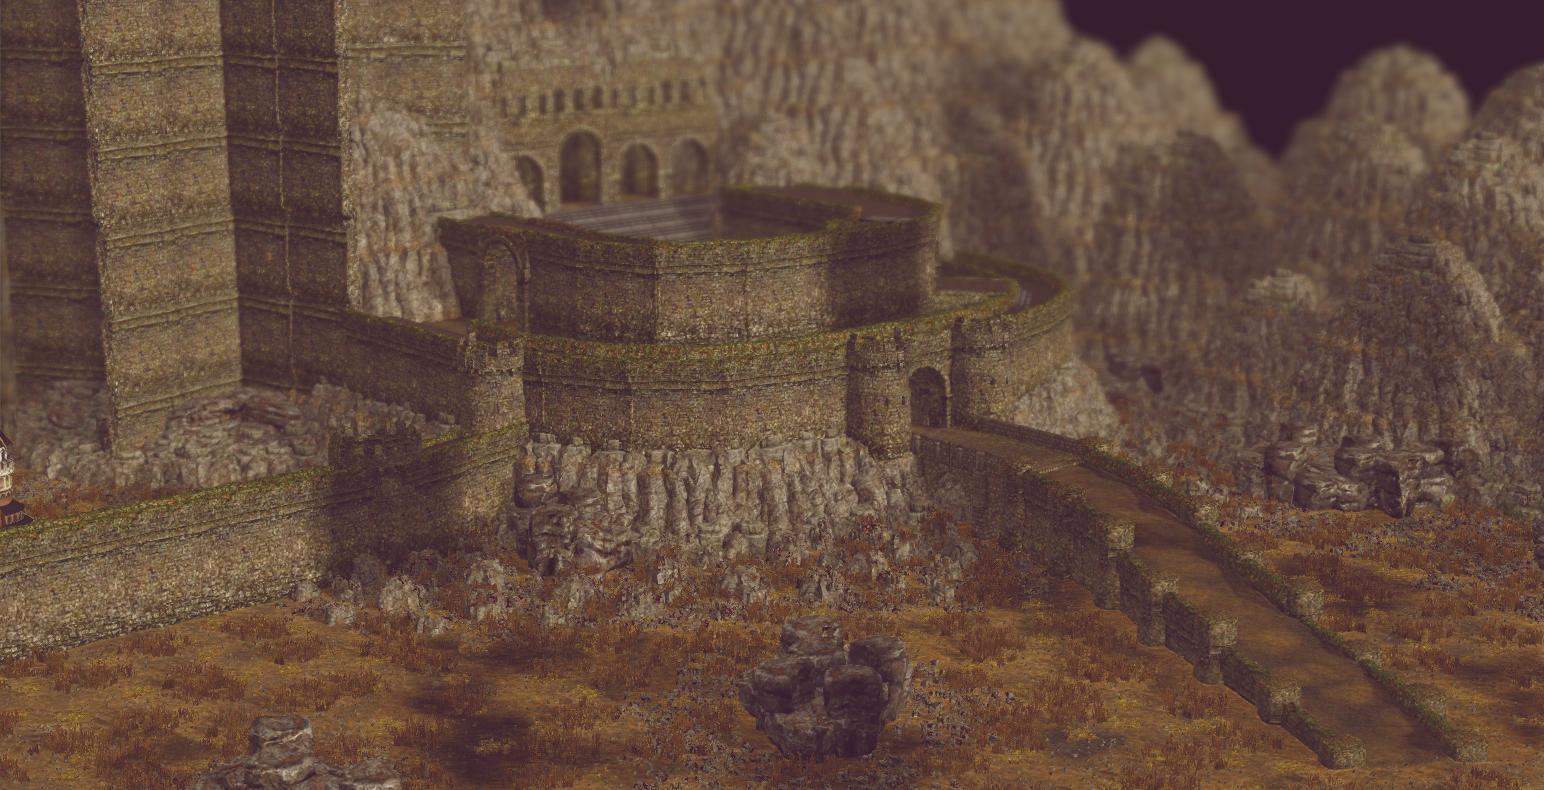 Designing environment and nature of Helms Deep map/episode